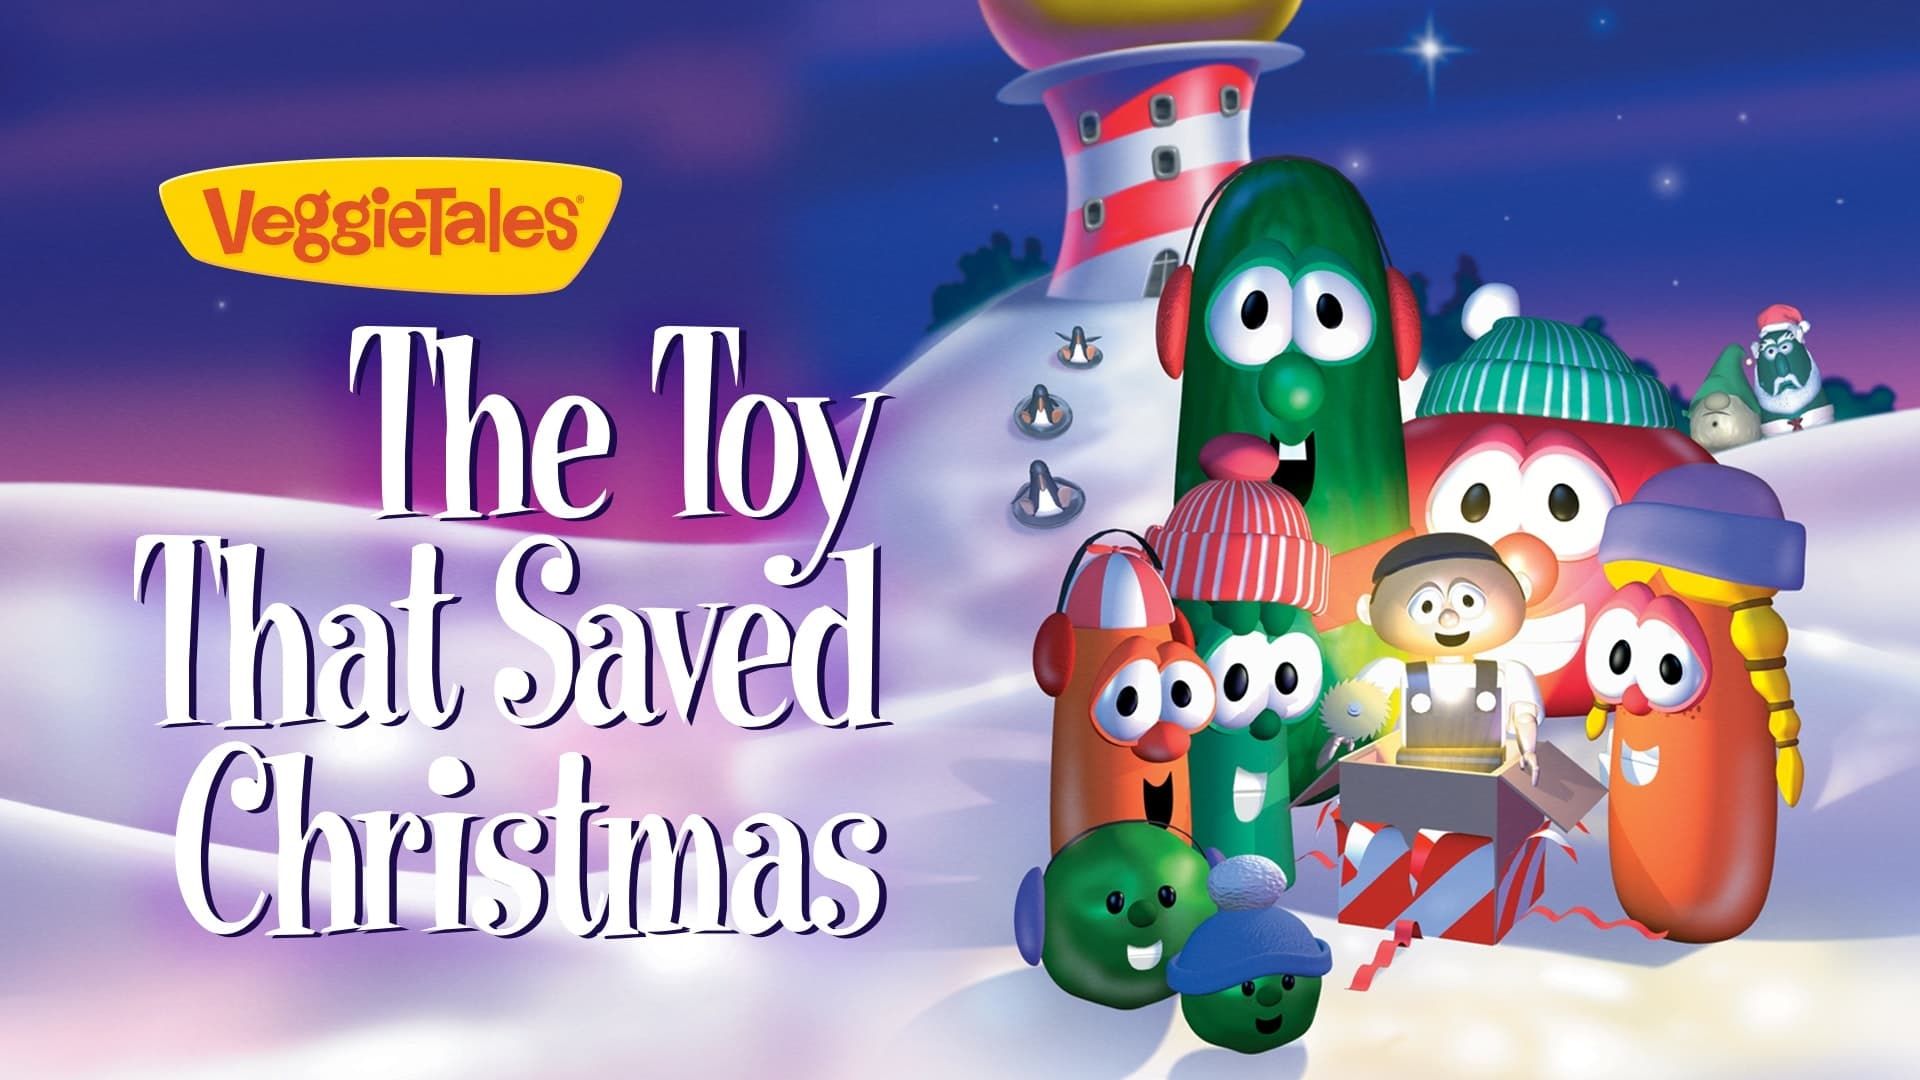 The Toy That Saved Christmas background